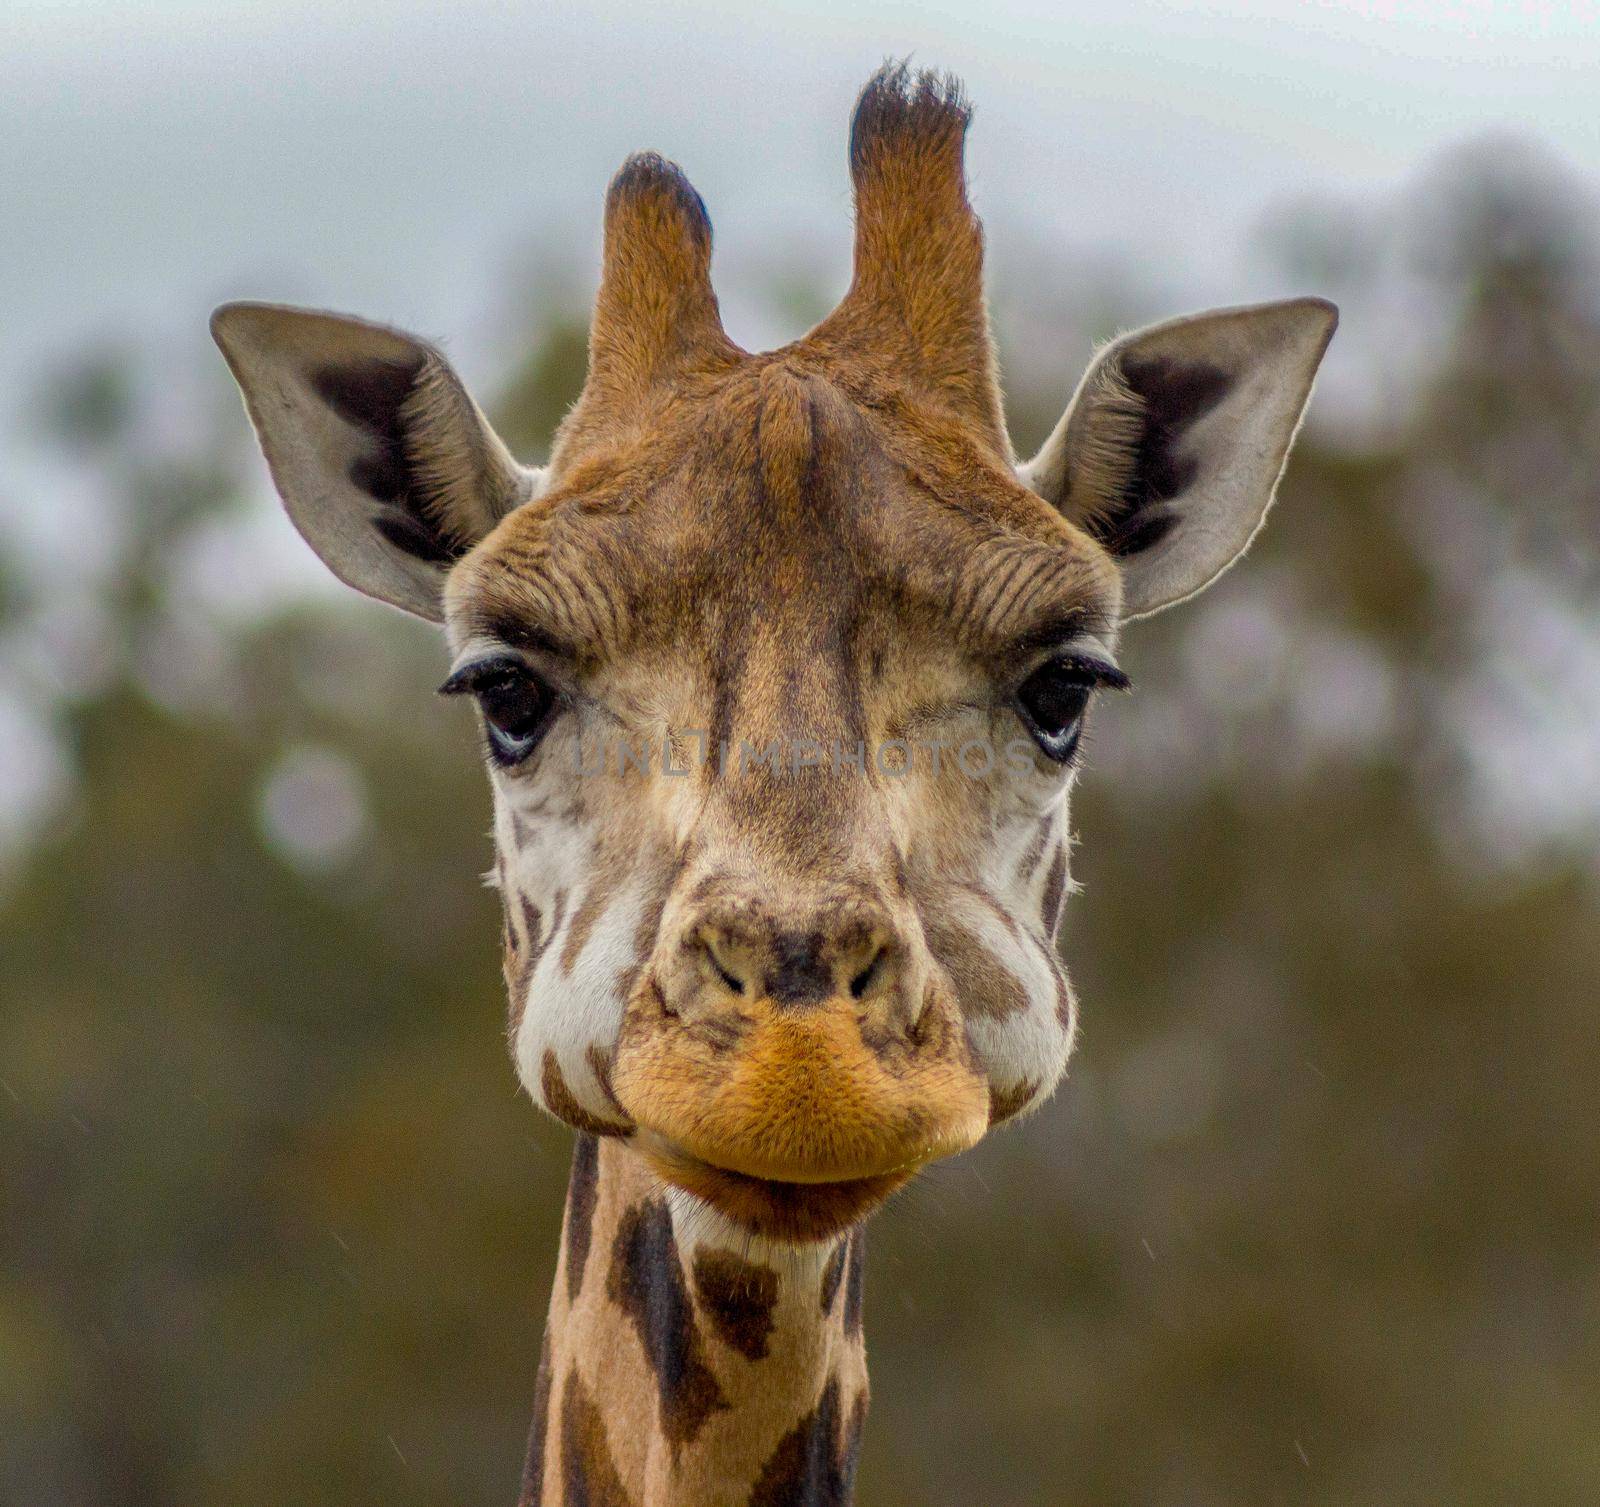 Head of a giraffe in a Zoo by bettercallcurry